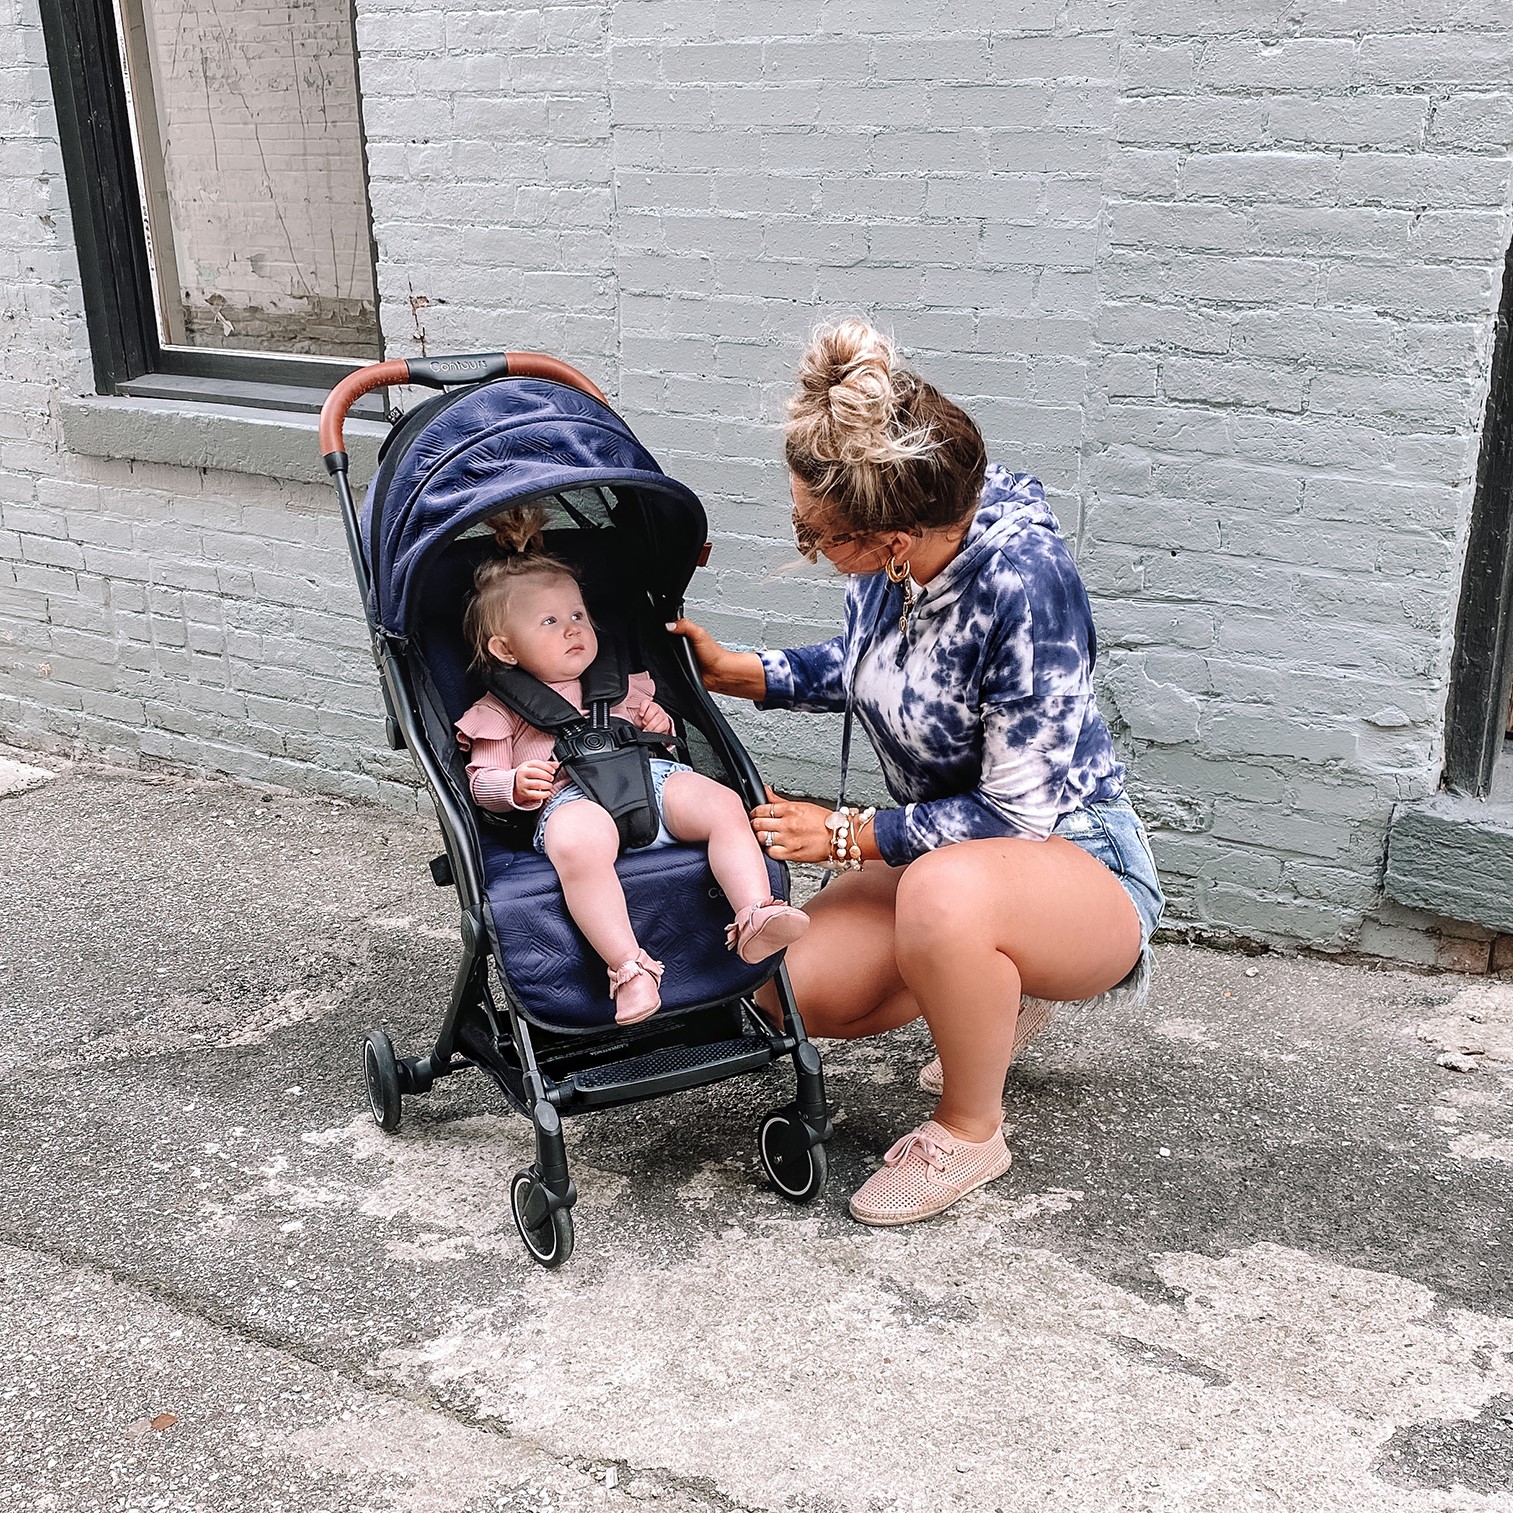 Do’s and Don’ts for Stroller Safety